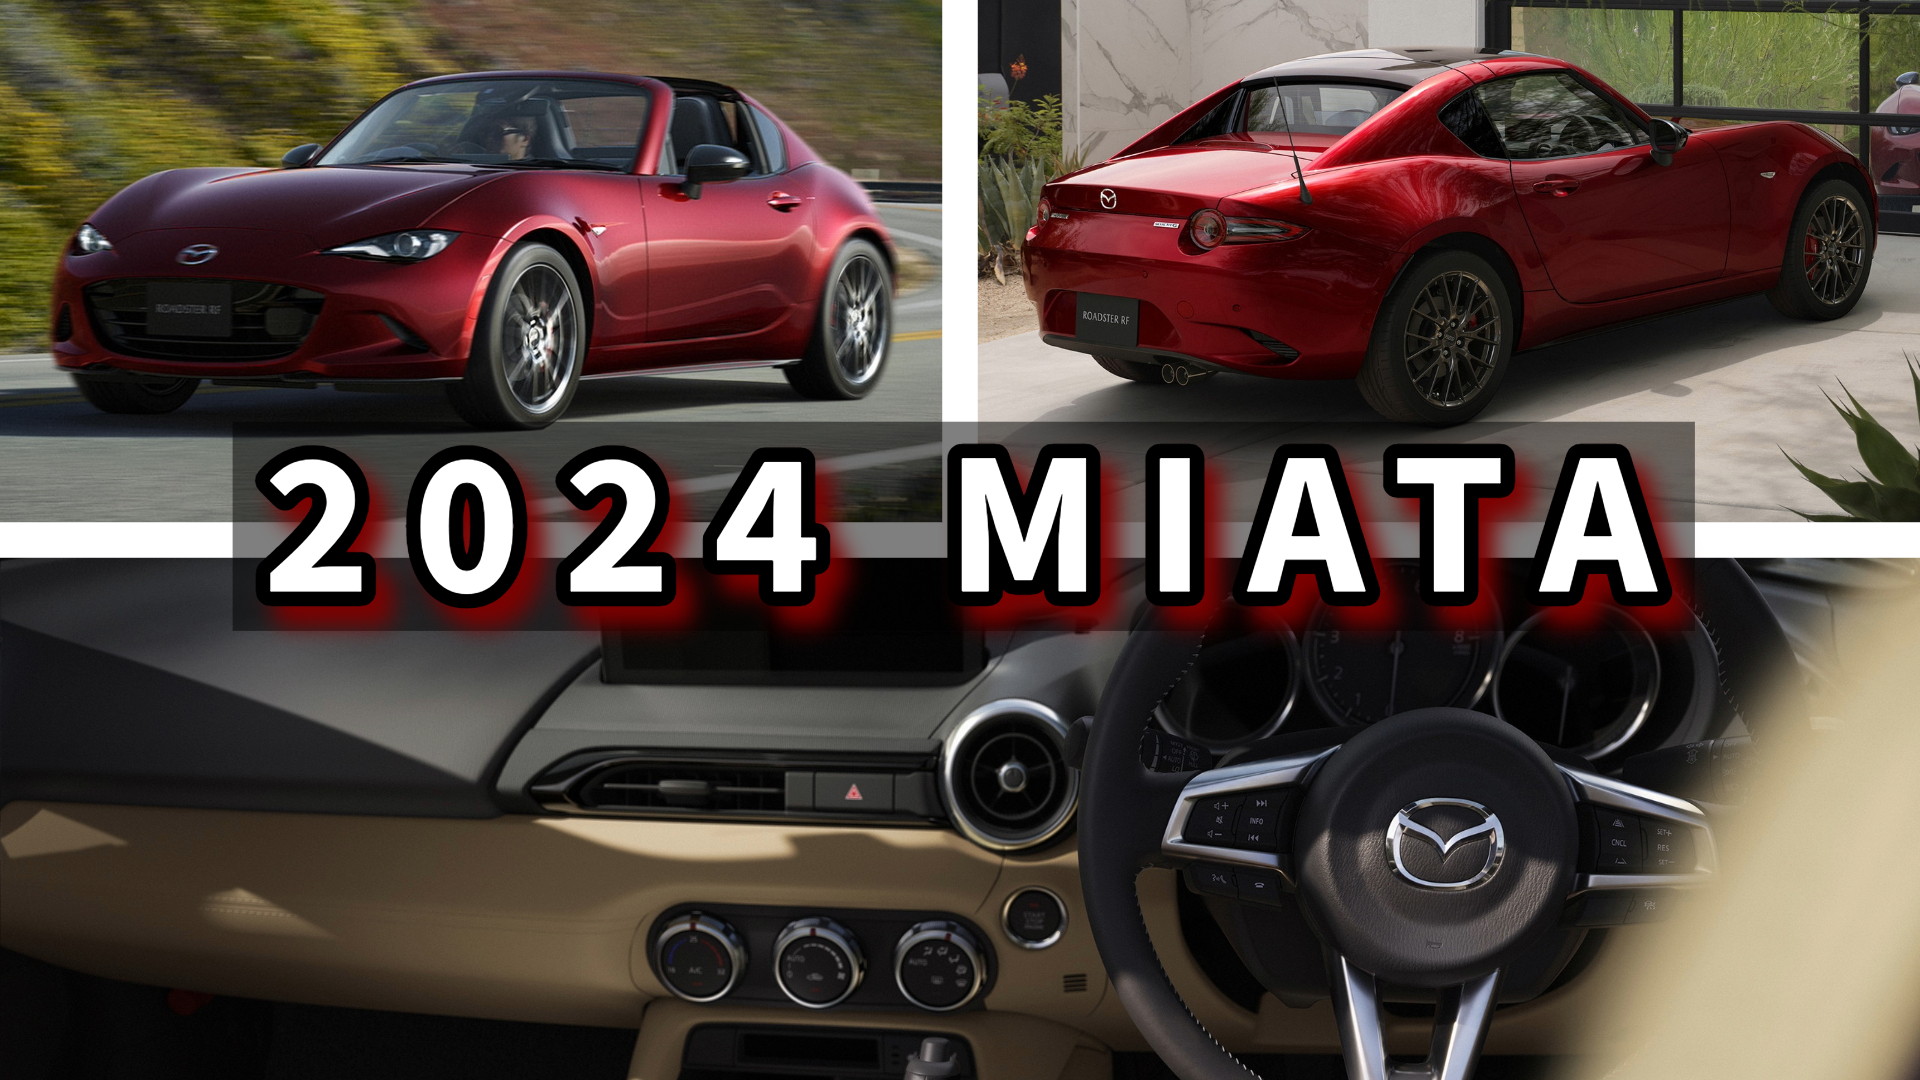 2024 Mazda MX-5 Unveiled With Revised Styling and Extra Goodies